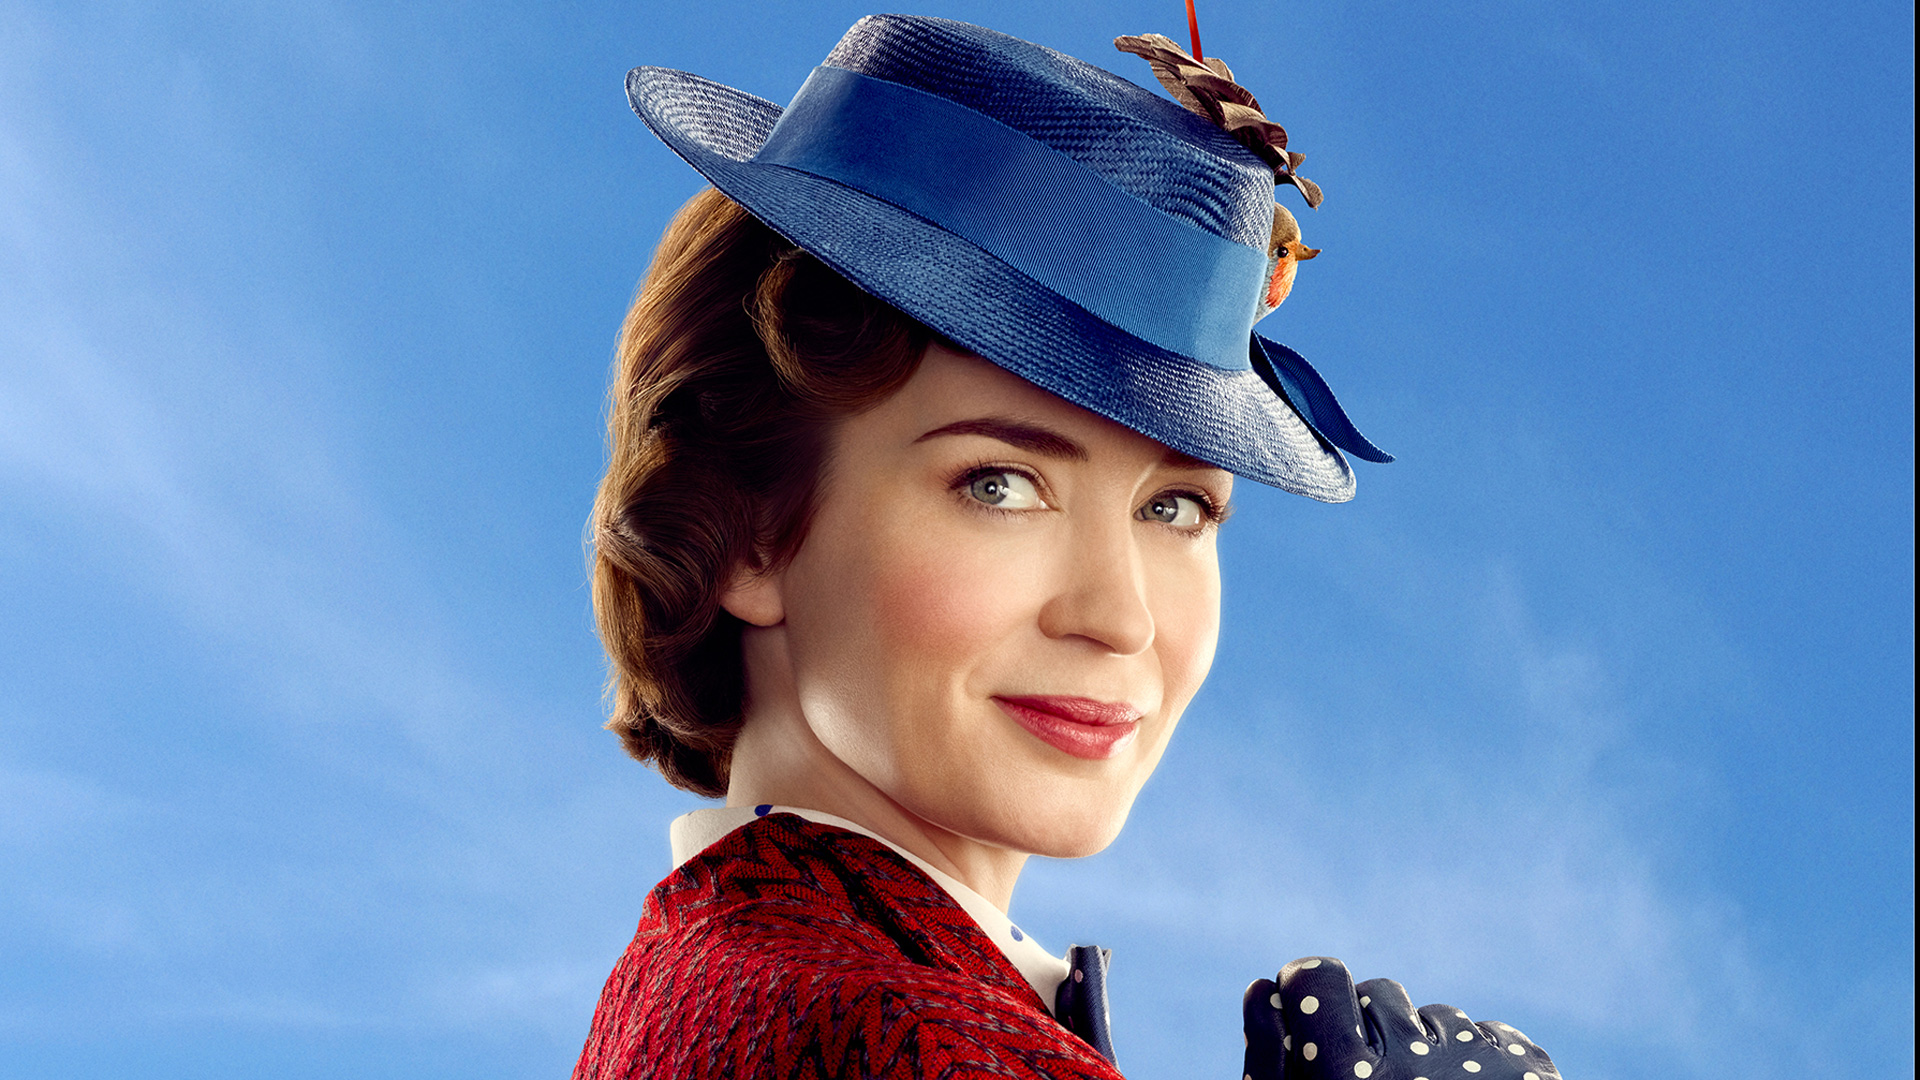 Mary Poppins Wallpapers